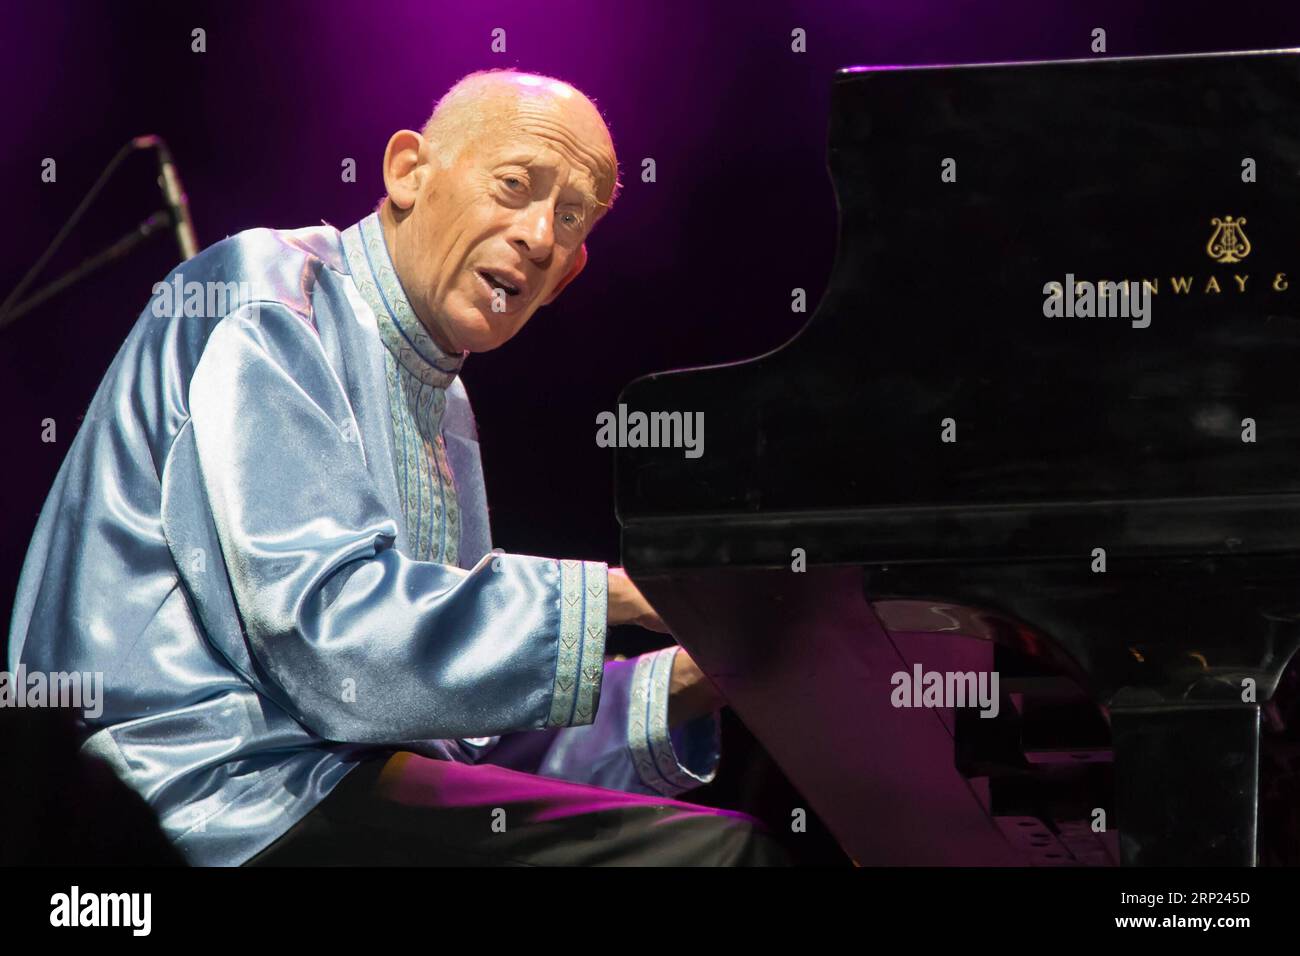 (180816) -- BUDAPEST, Aug. 16, 2018 -- Australian concert pianist David Helfgott performs during his concert in Papp Laszlo Sports Arena in Budapest, Hungary on Aug. 15, 2018. )(gj) HUNGARY-BUDAPEST-MUSIC CONCERT AttilaxVolgyi PUBLICATIONxNOTxINxCHN Stock Photo